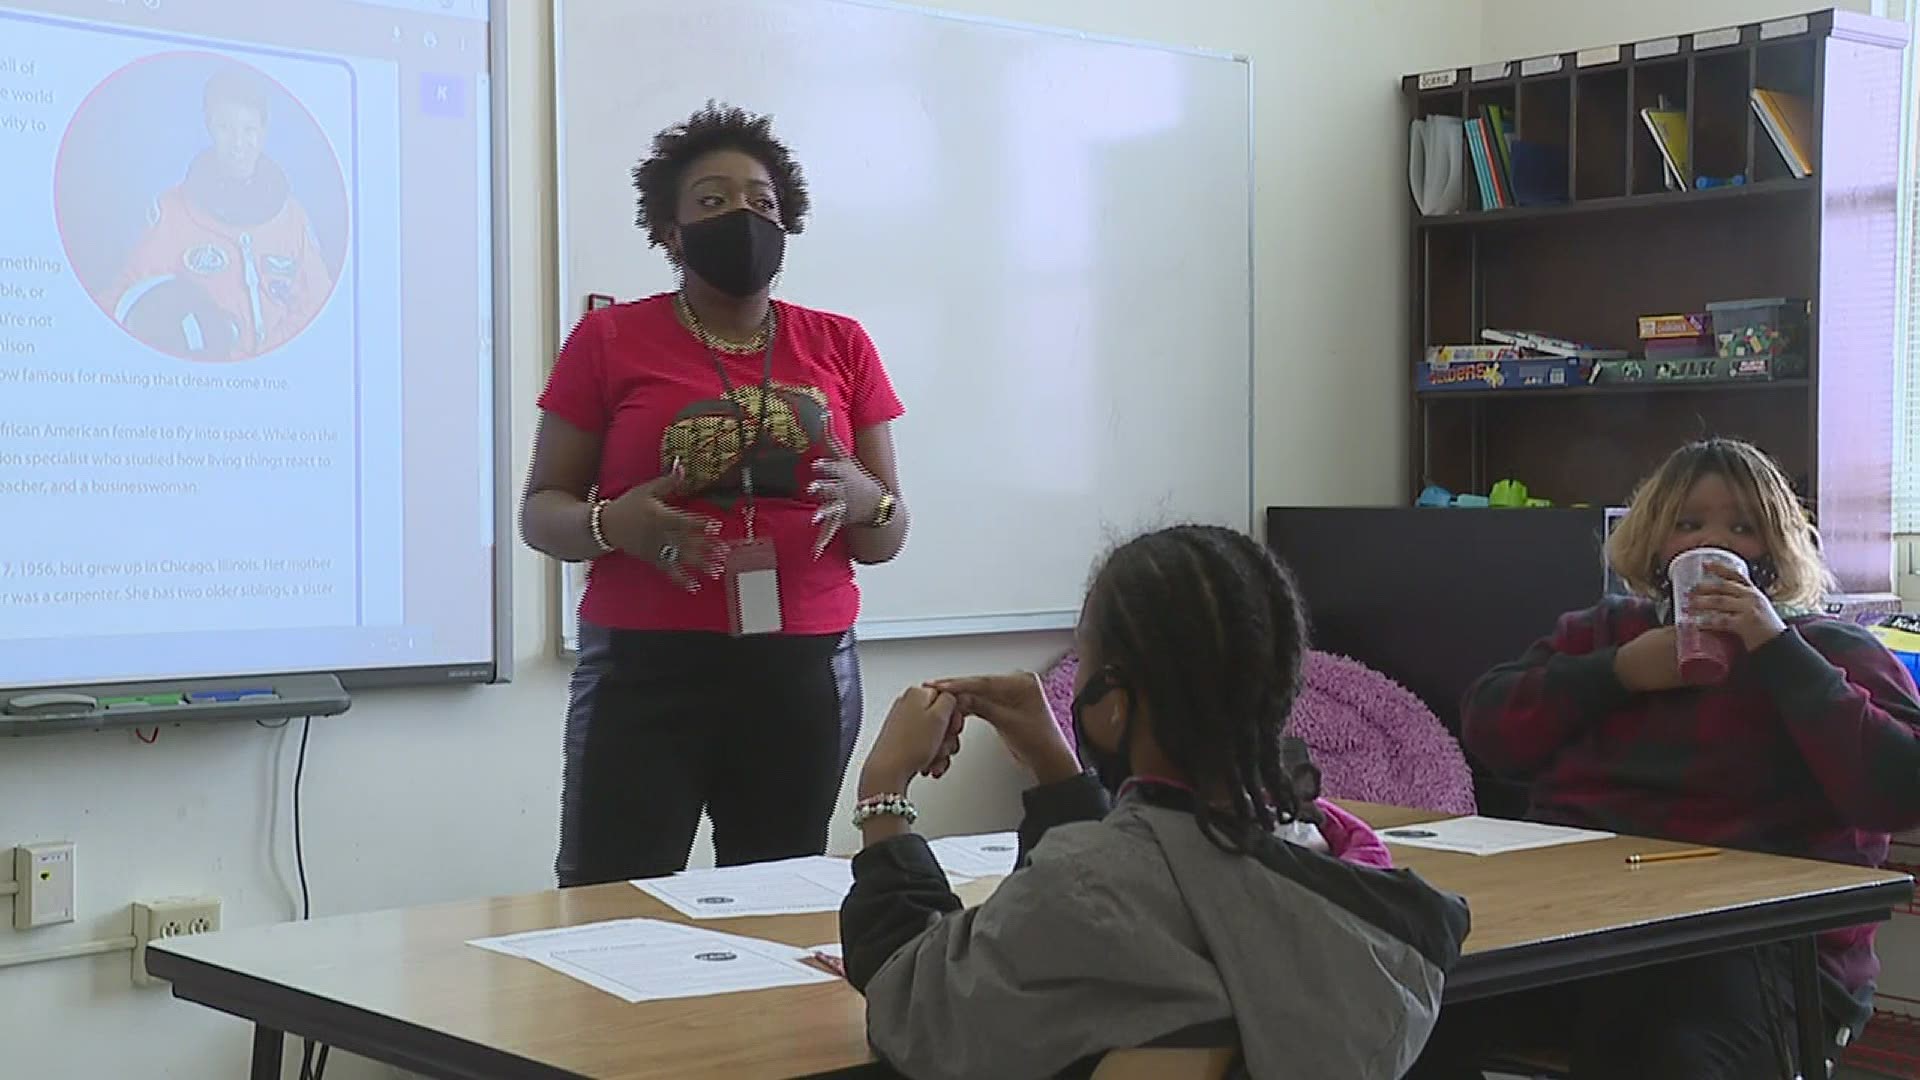 Paraeducator Kevita Puckett travels giving lessons on Black History Month and taught fifth graders at Jefferson Elementary School in Davenport, Iowa.